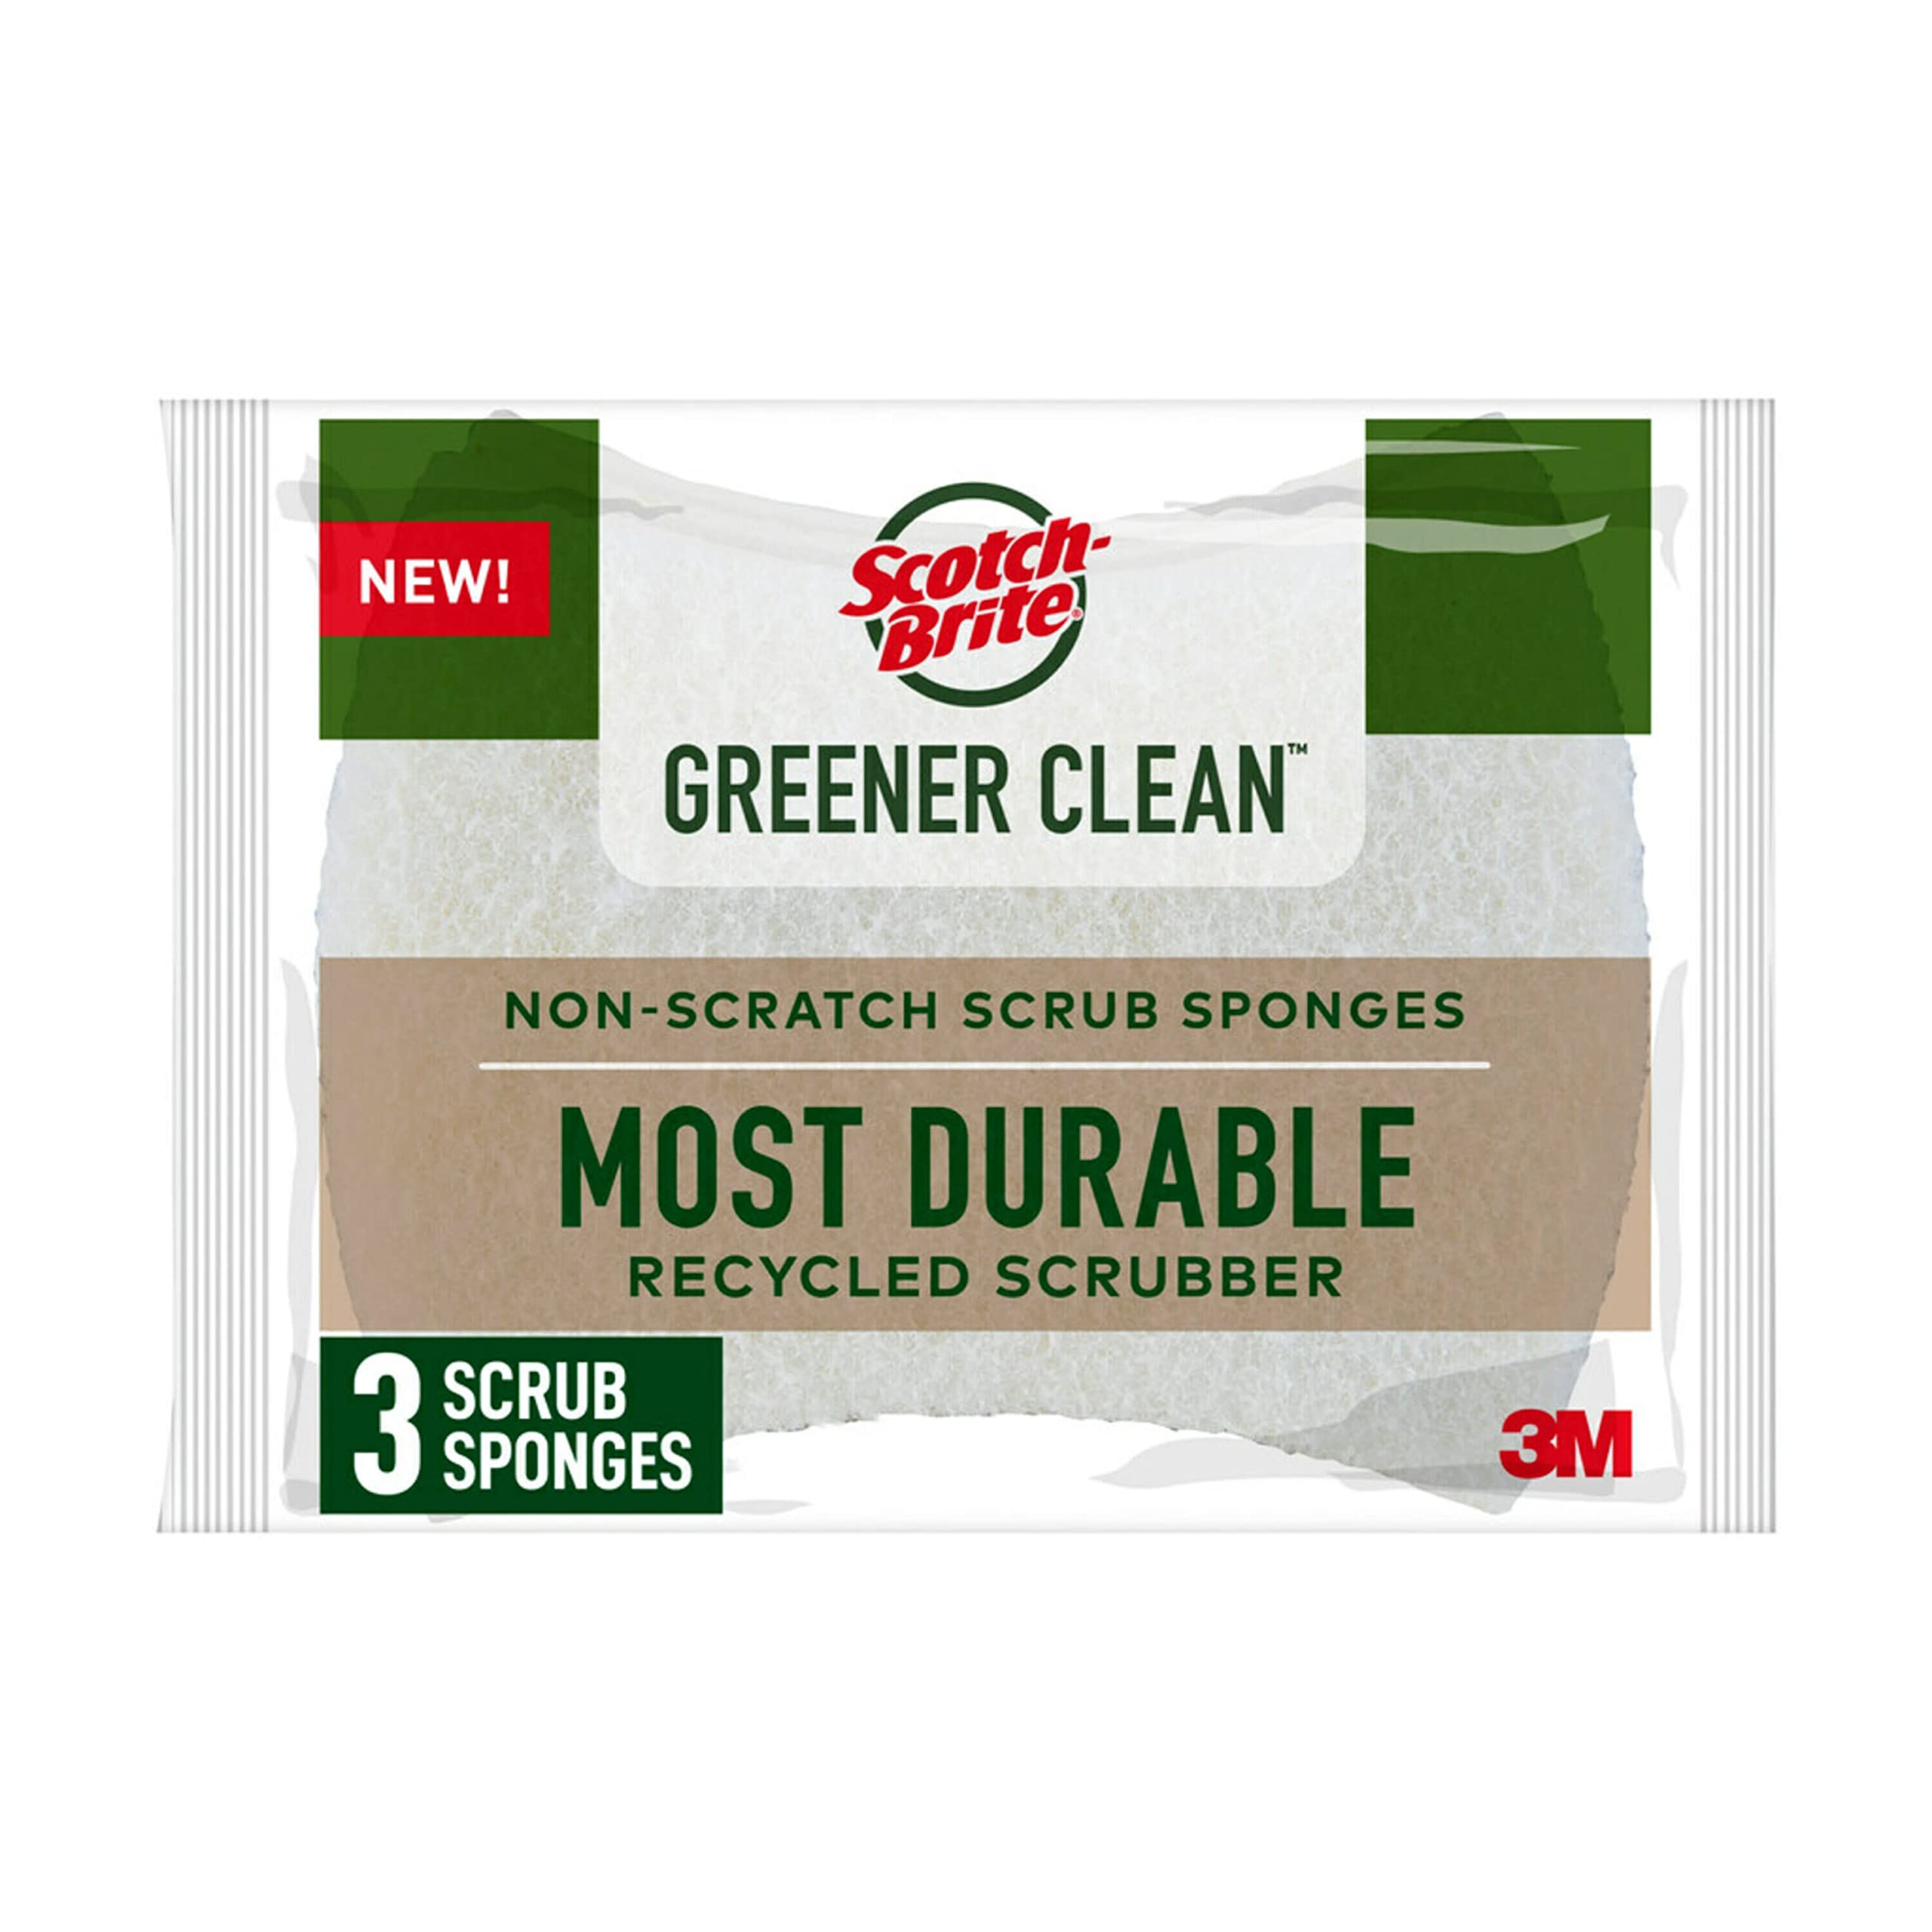 Scotch-Brite Greener Clean Non-Scratch Scrub Sponge, Sponge for Washing Dishes, Cleaning Kitchen, Superior Performance and Made with Sustainable Materials, Dishwasher Safe, 3 Scrub Sponges